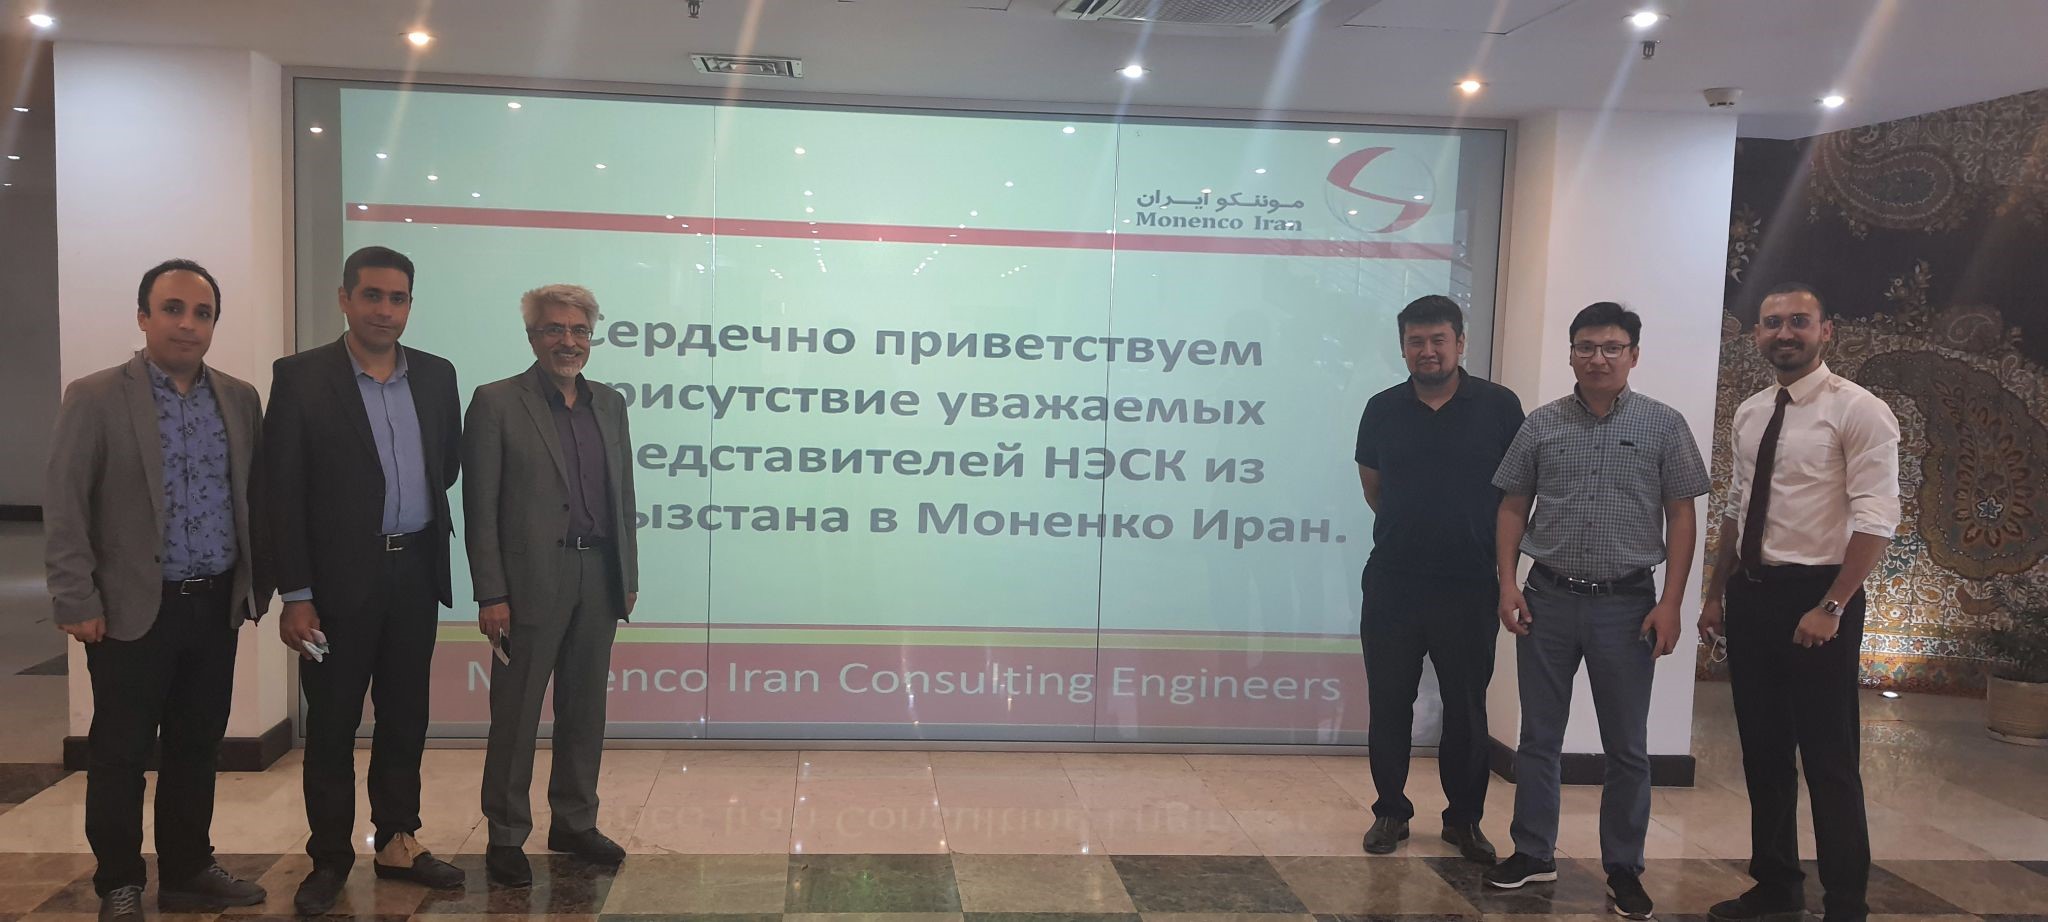 Holding Training Courses such as PMBOK for Kyrgyz Employers of the CASA-1000 Project in Iran